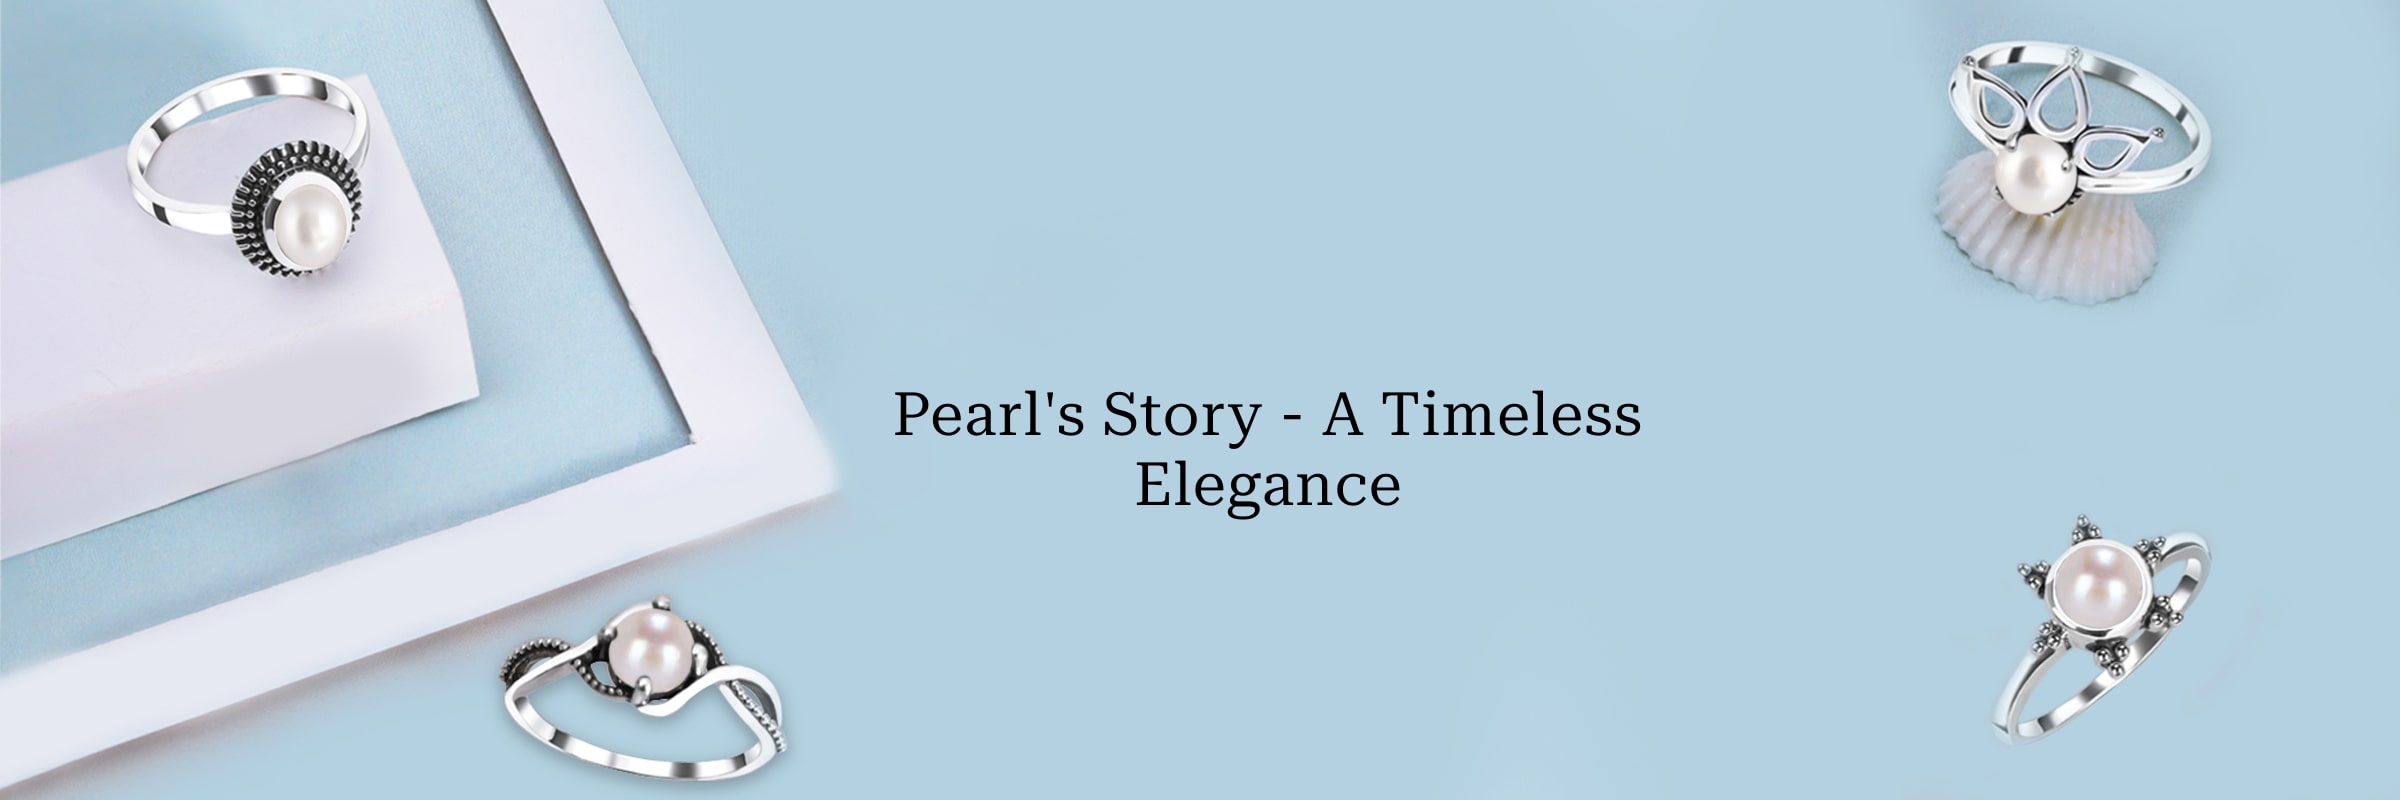 History of Pearl